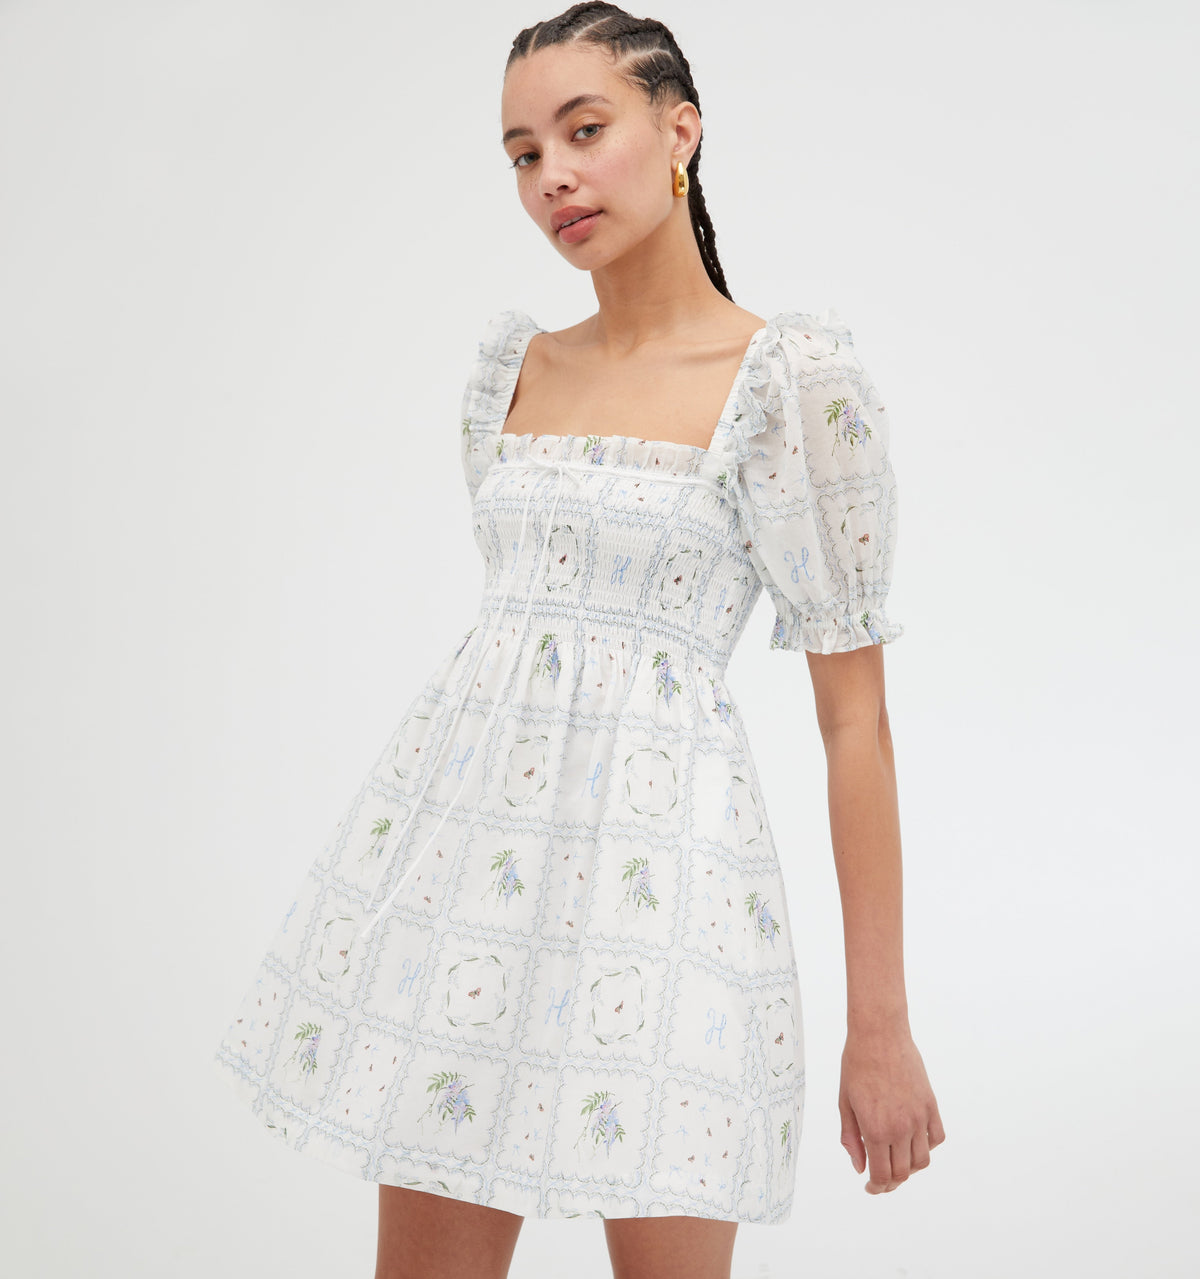 The Scarlett Mini Nap Dress in White Floral Patchwork